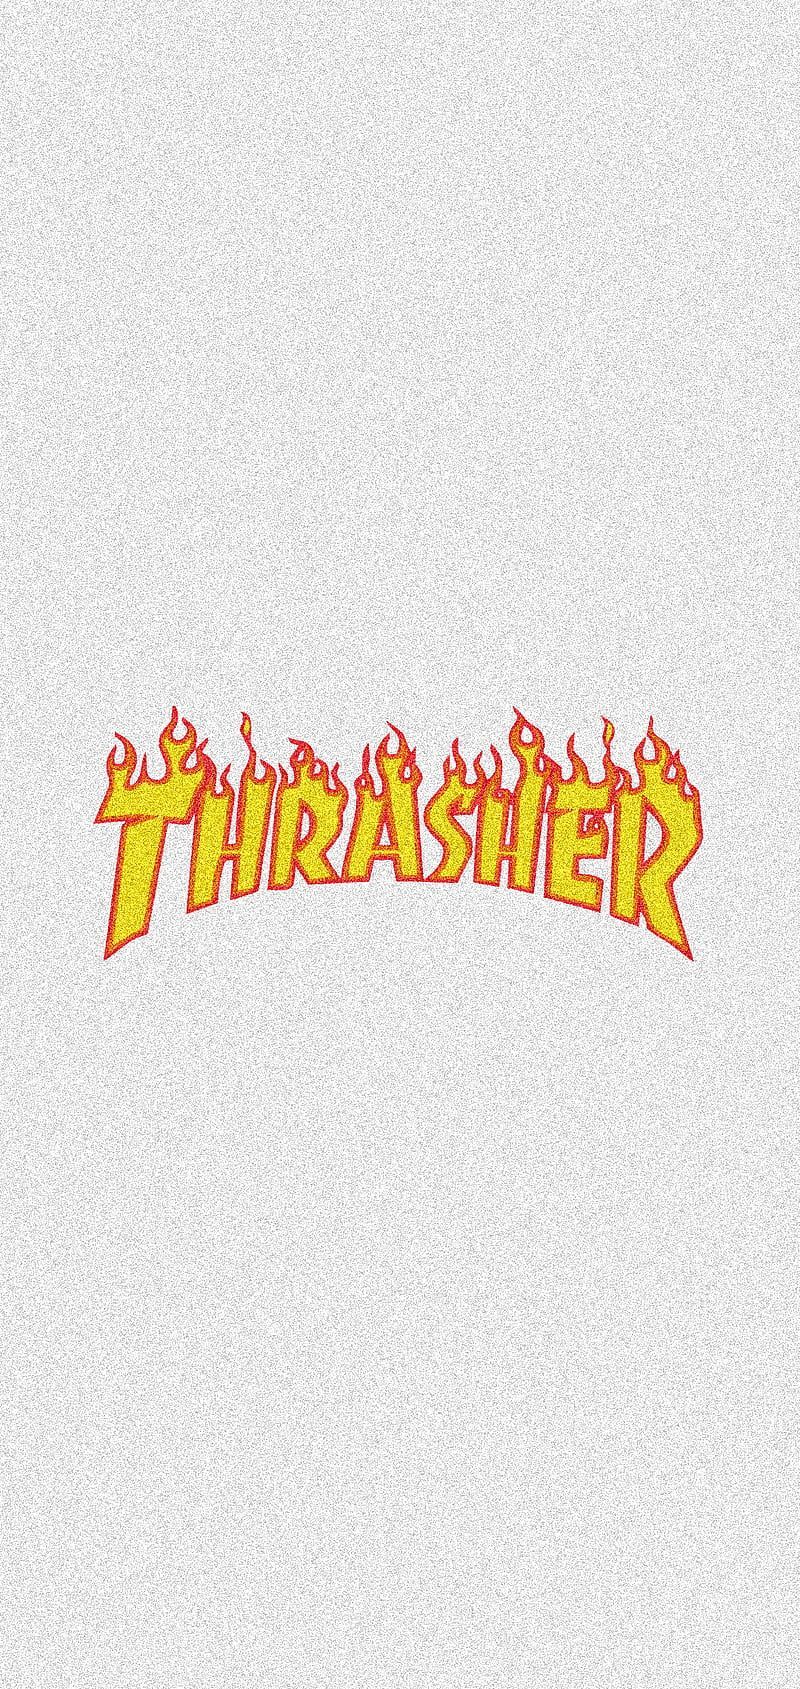 Thrasher wallpaper by anonymous - Thrasher